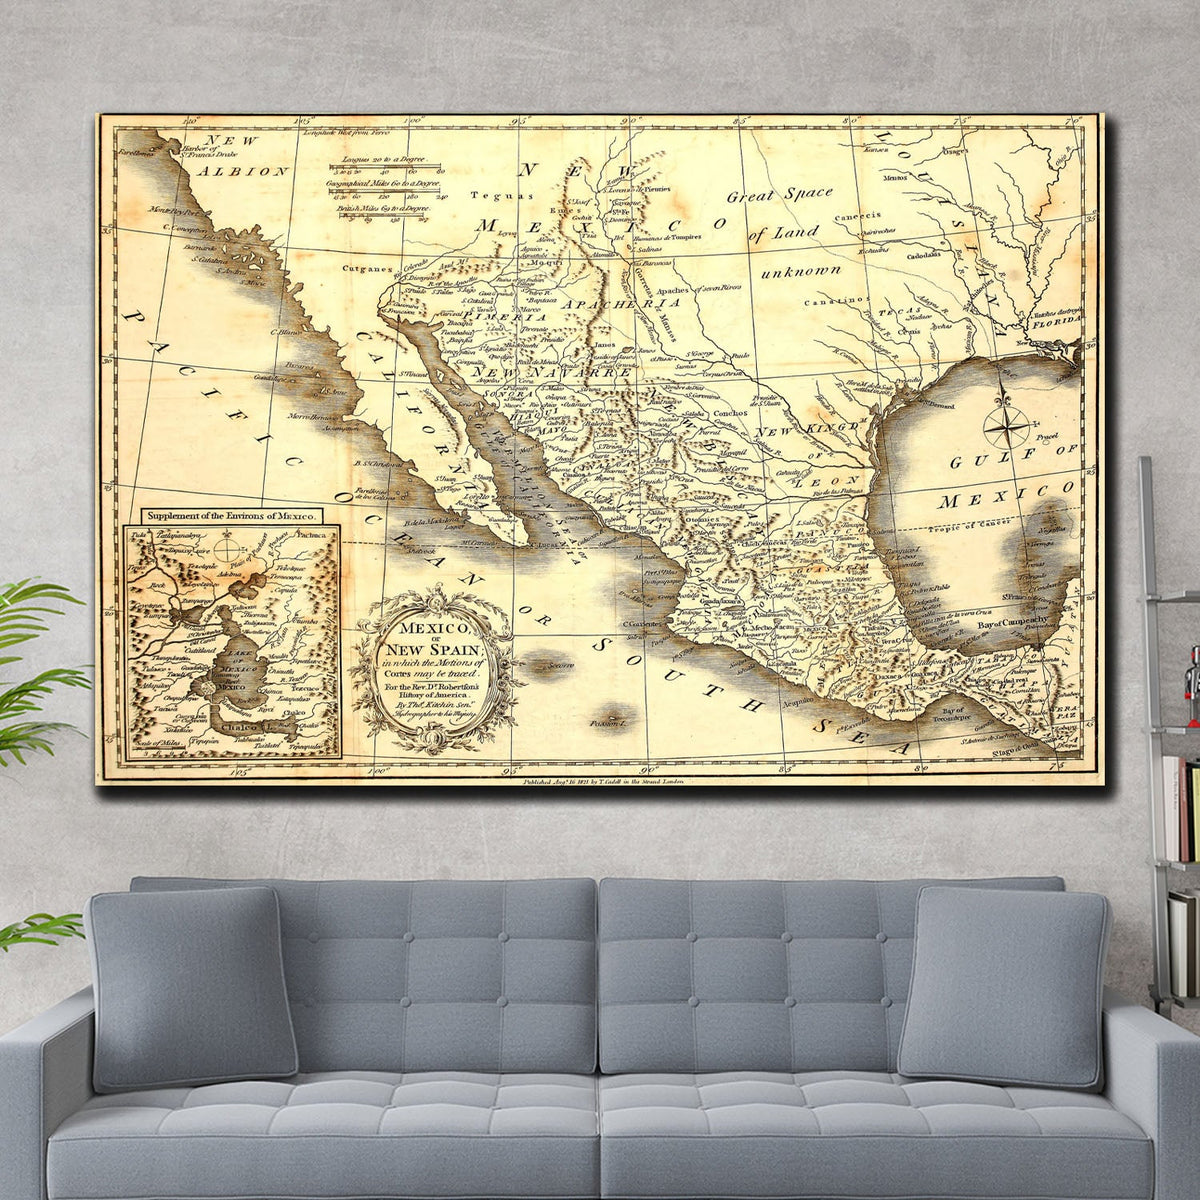 https://cdn.shopify.com/s/files/1/0387/9986/8044/products/OldMapofMexicoCanvasArtprintStretched-2.jpg